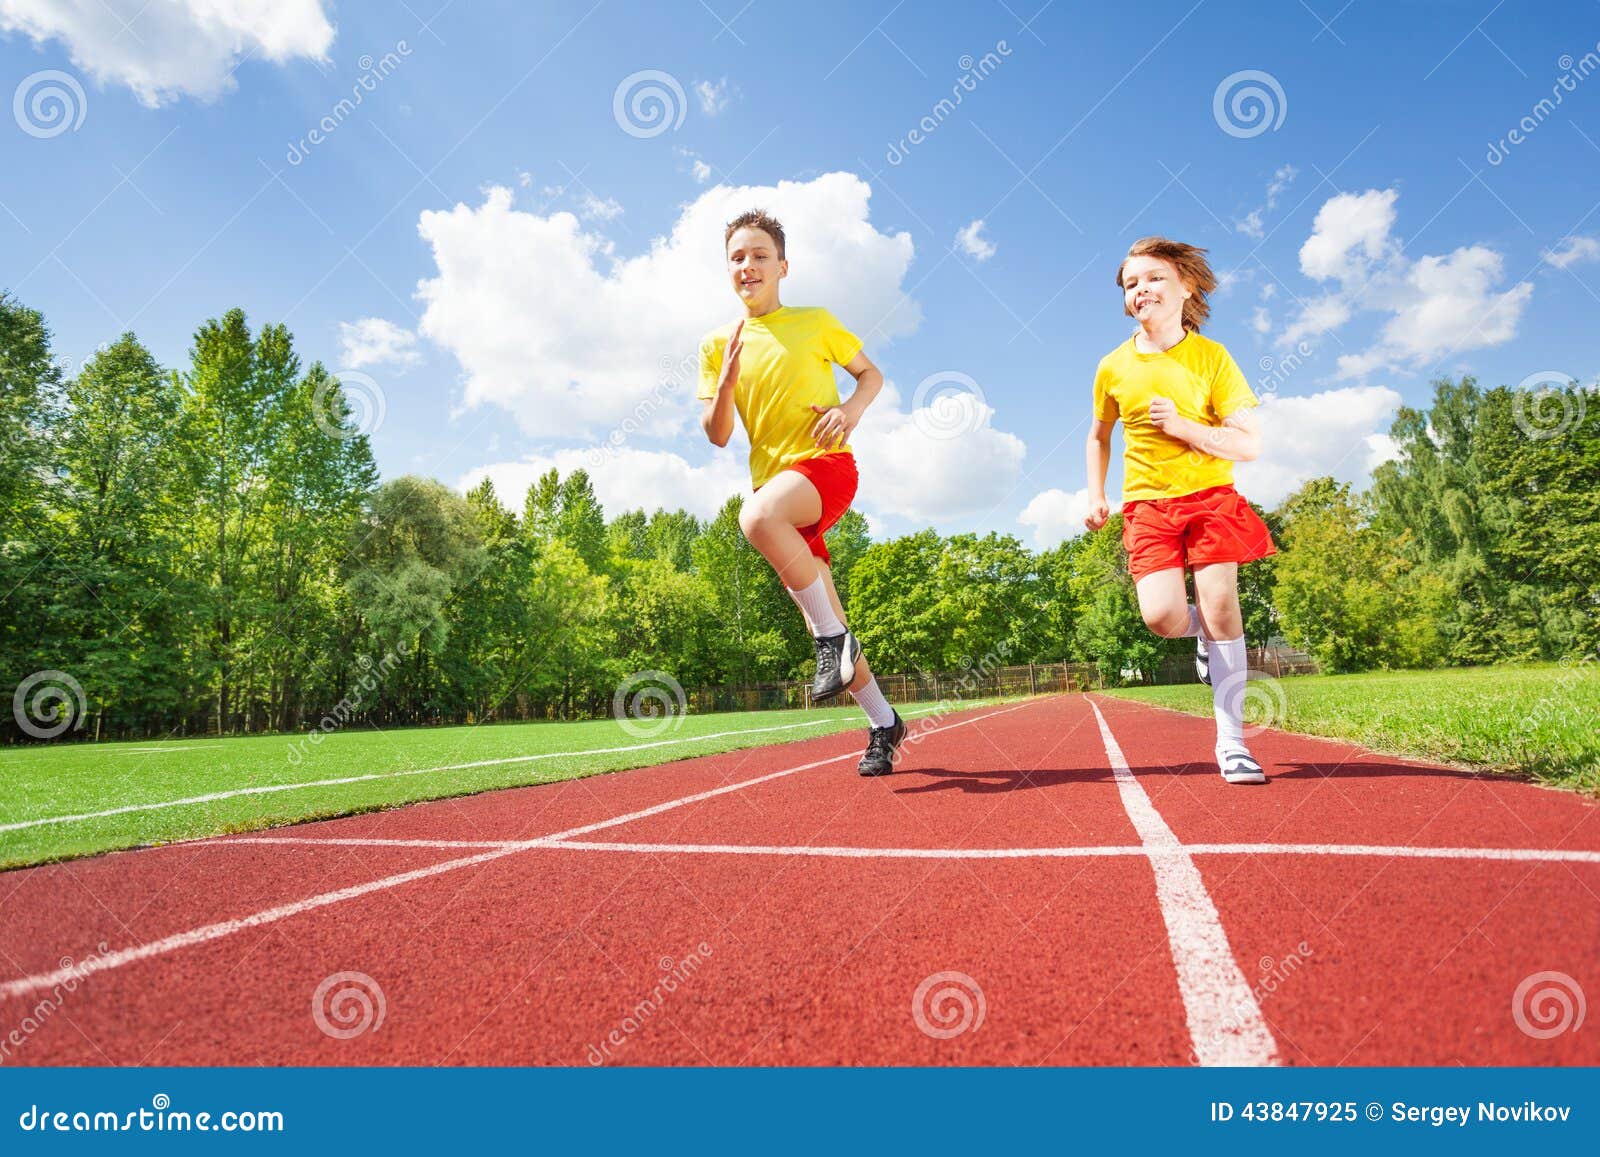 two guys running together in competition